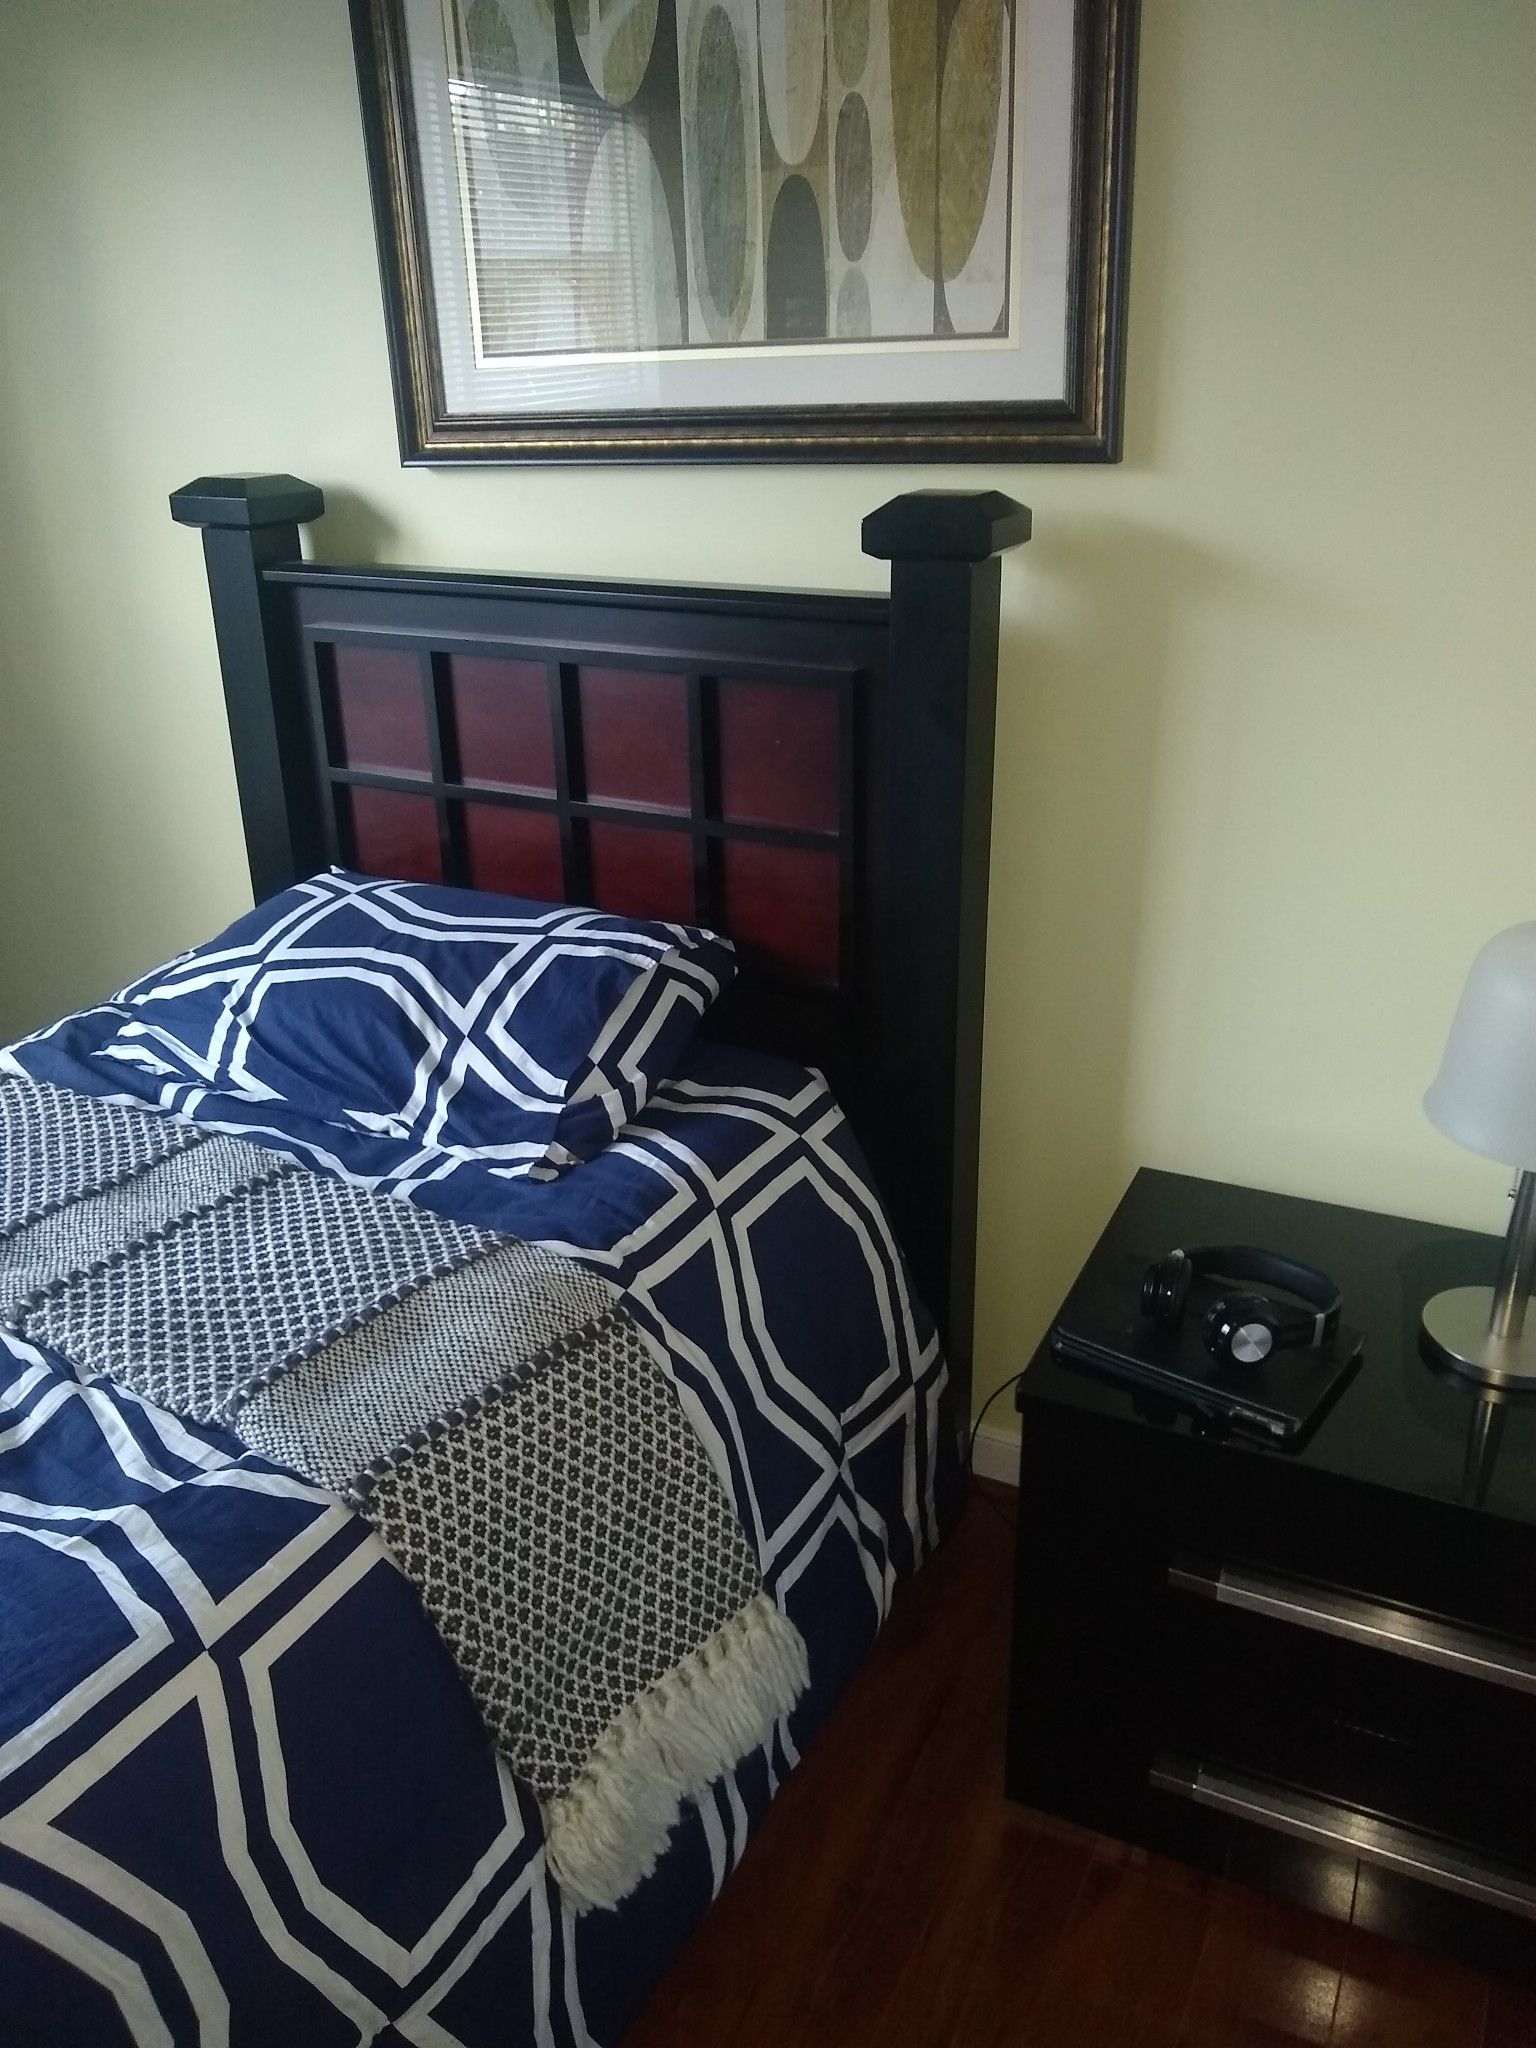 Bed free and night stand